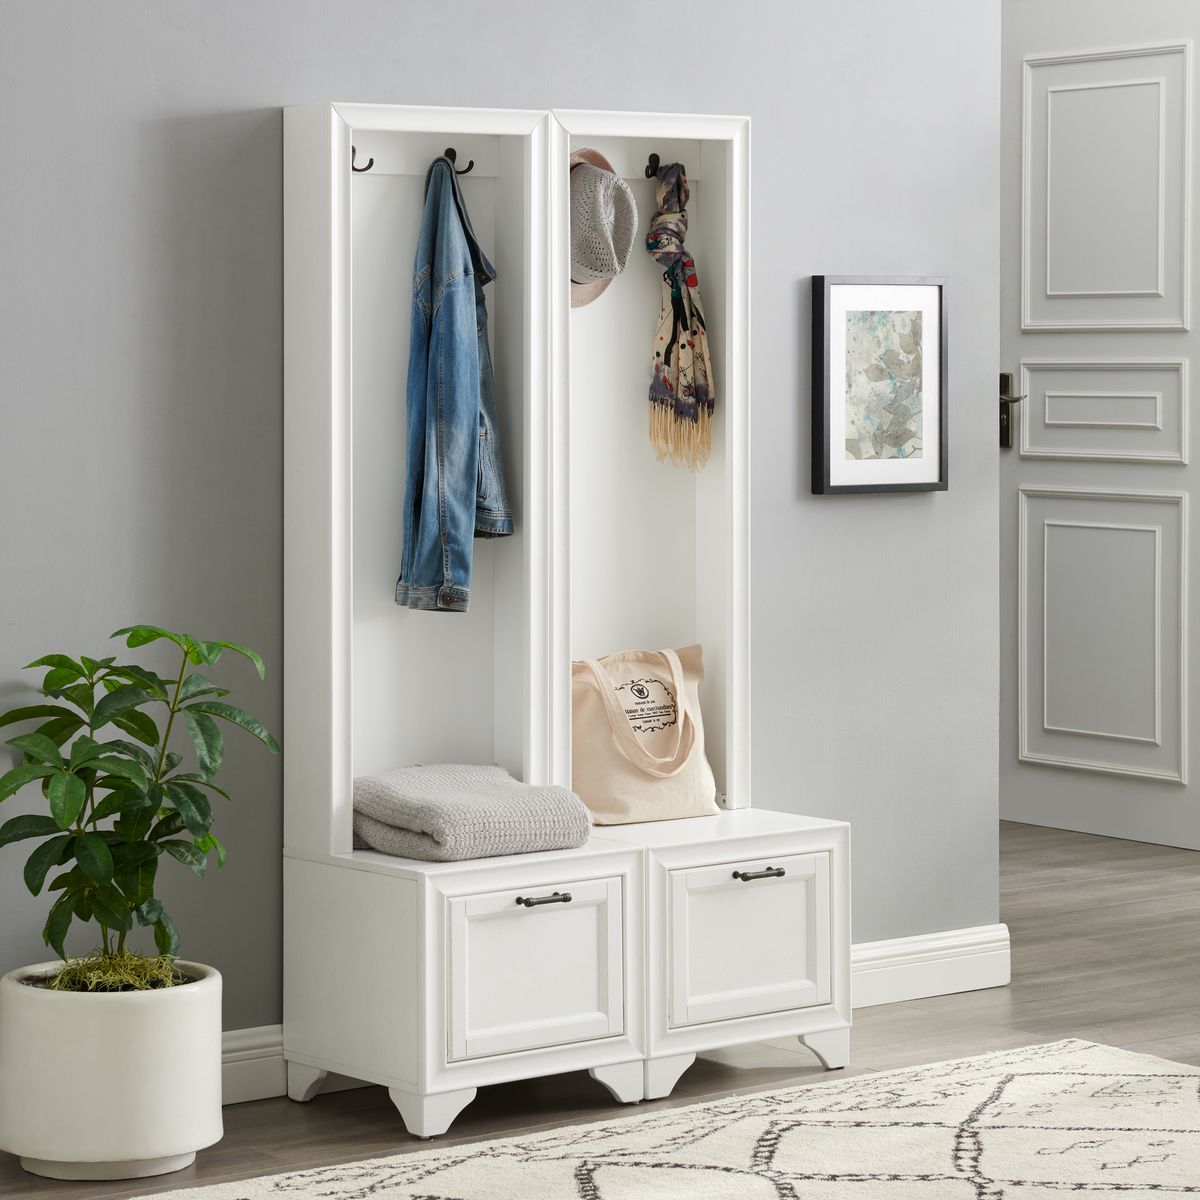 Picture of Crosley Furniture KF33007WH Entryway Set, Distressed White - 2 Hall Trees - 2 Piece